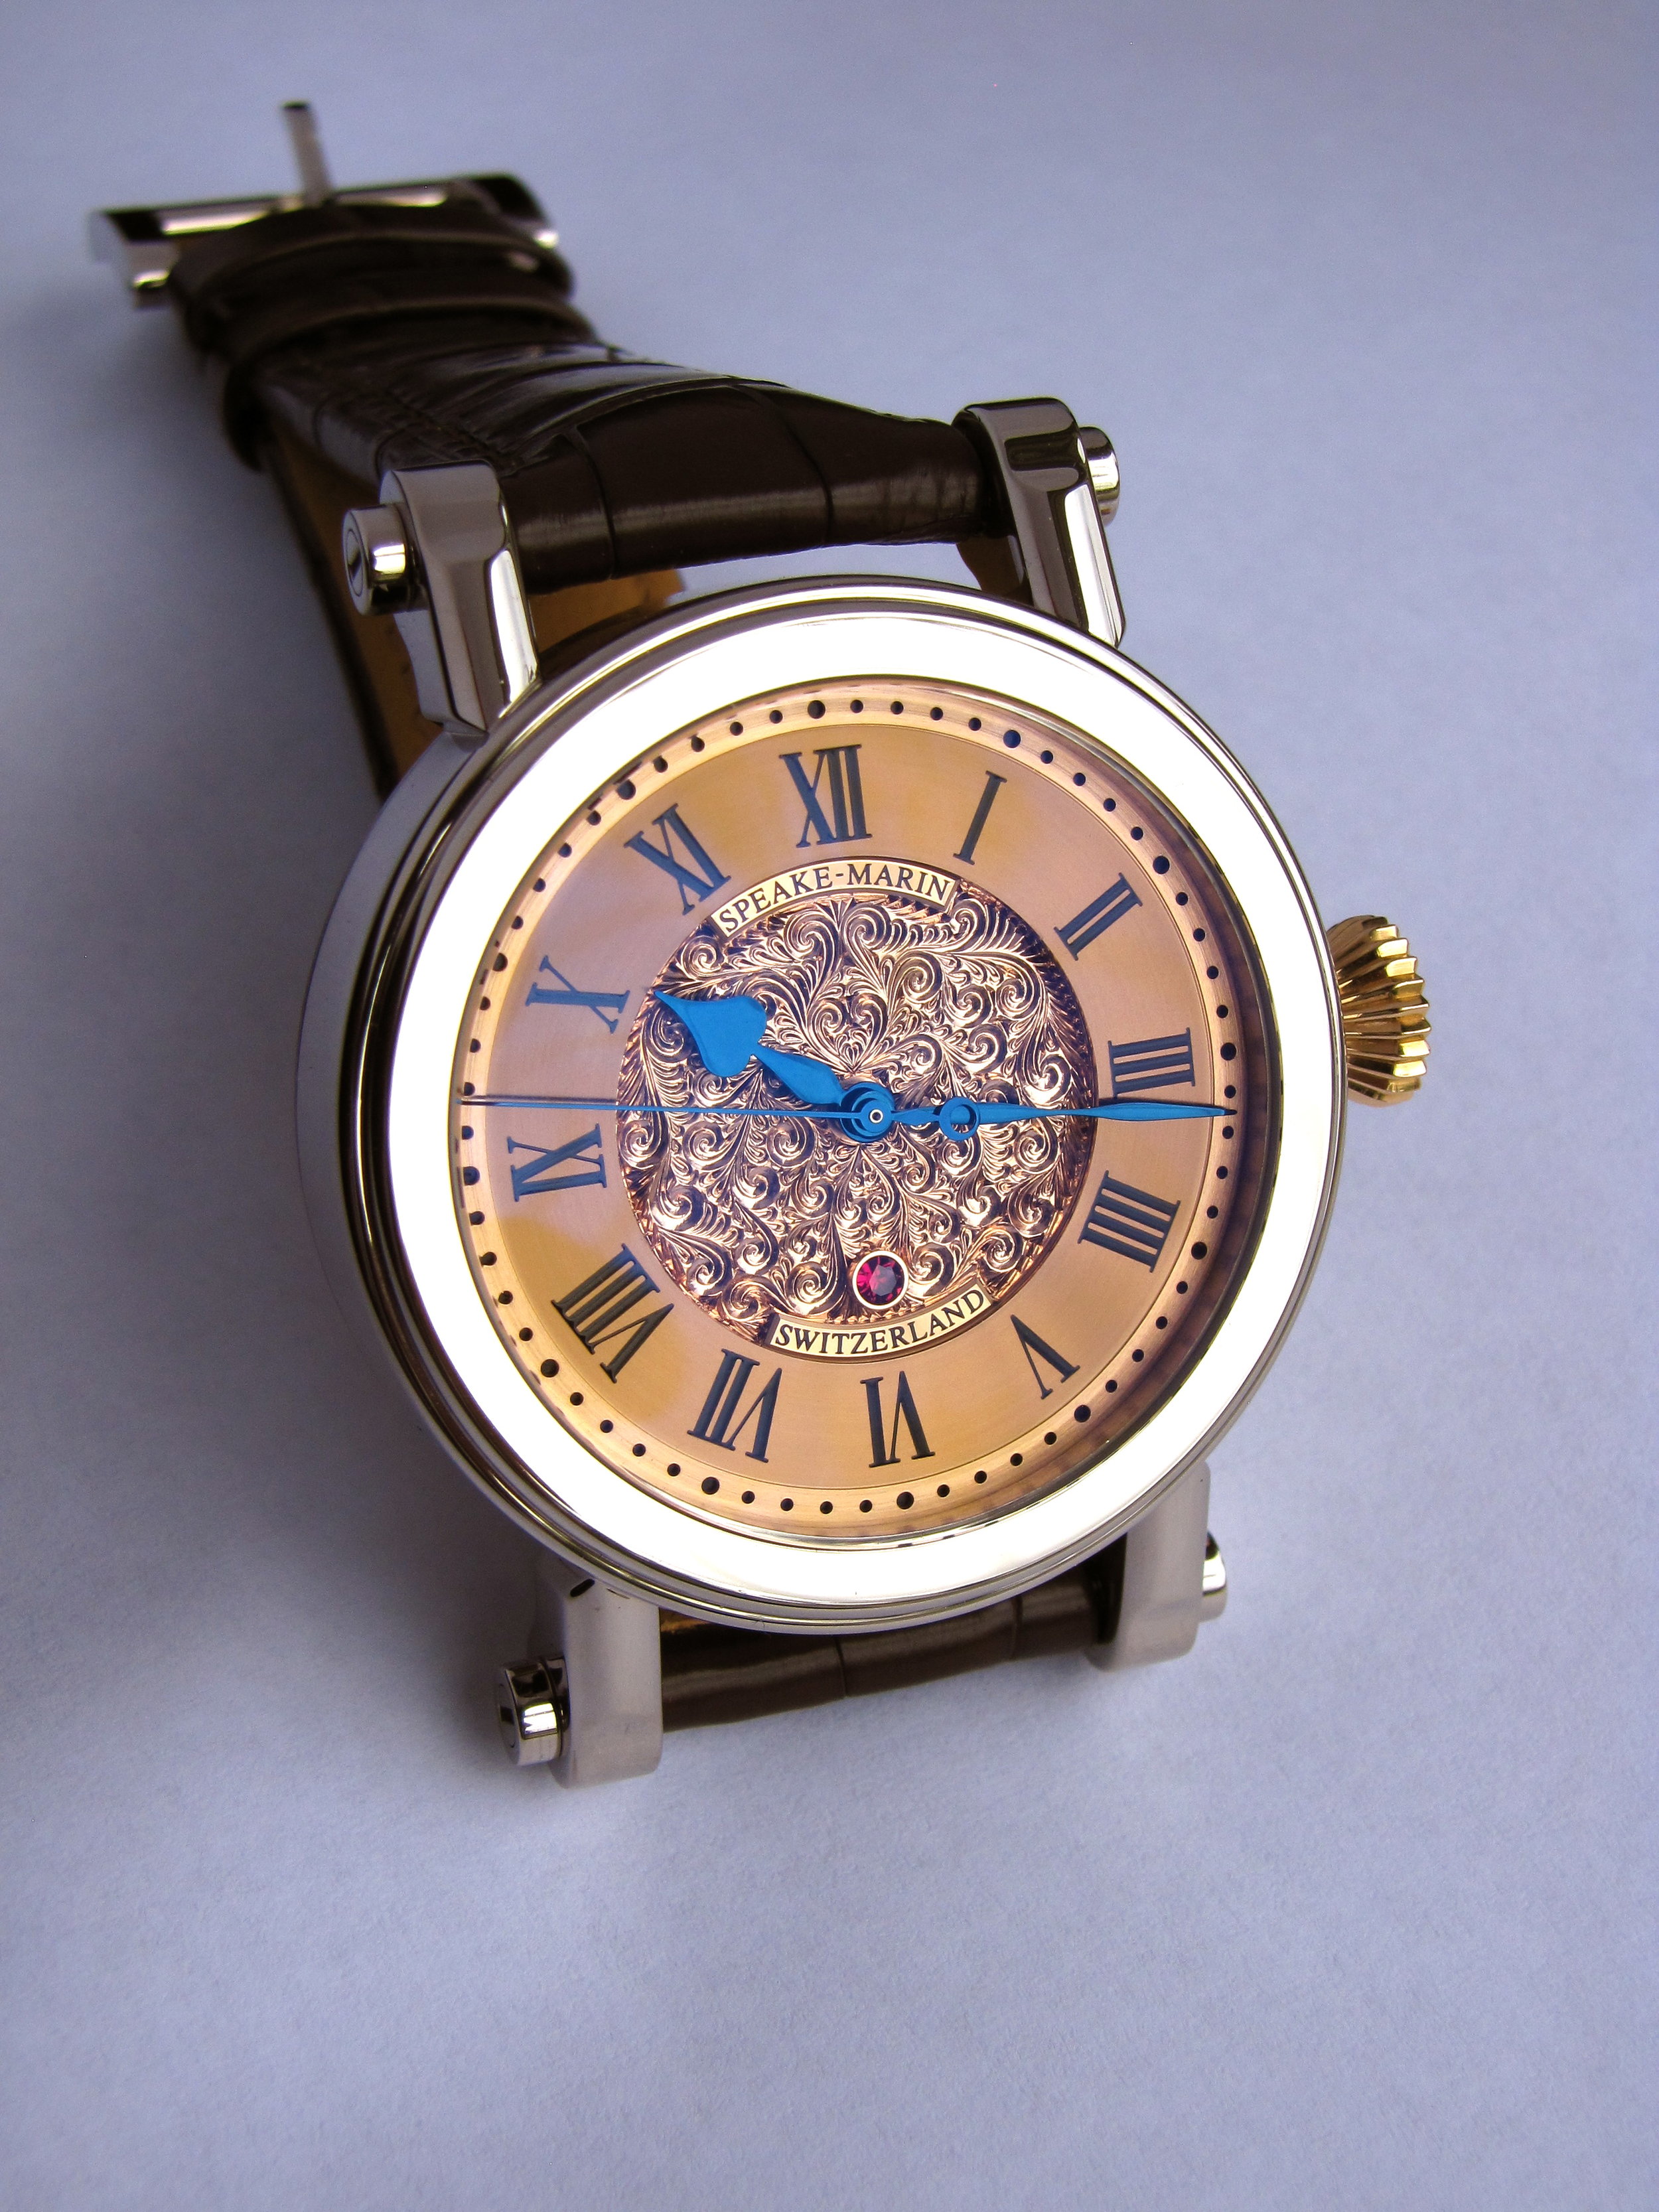 Unique 18k WG Piccadilly engraved dial 42mm